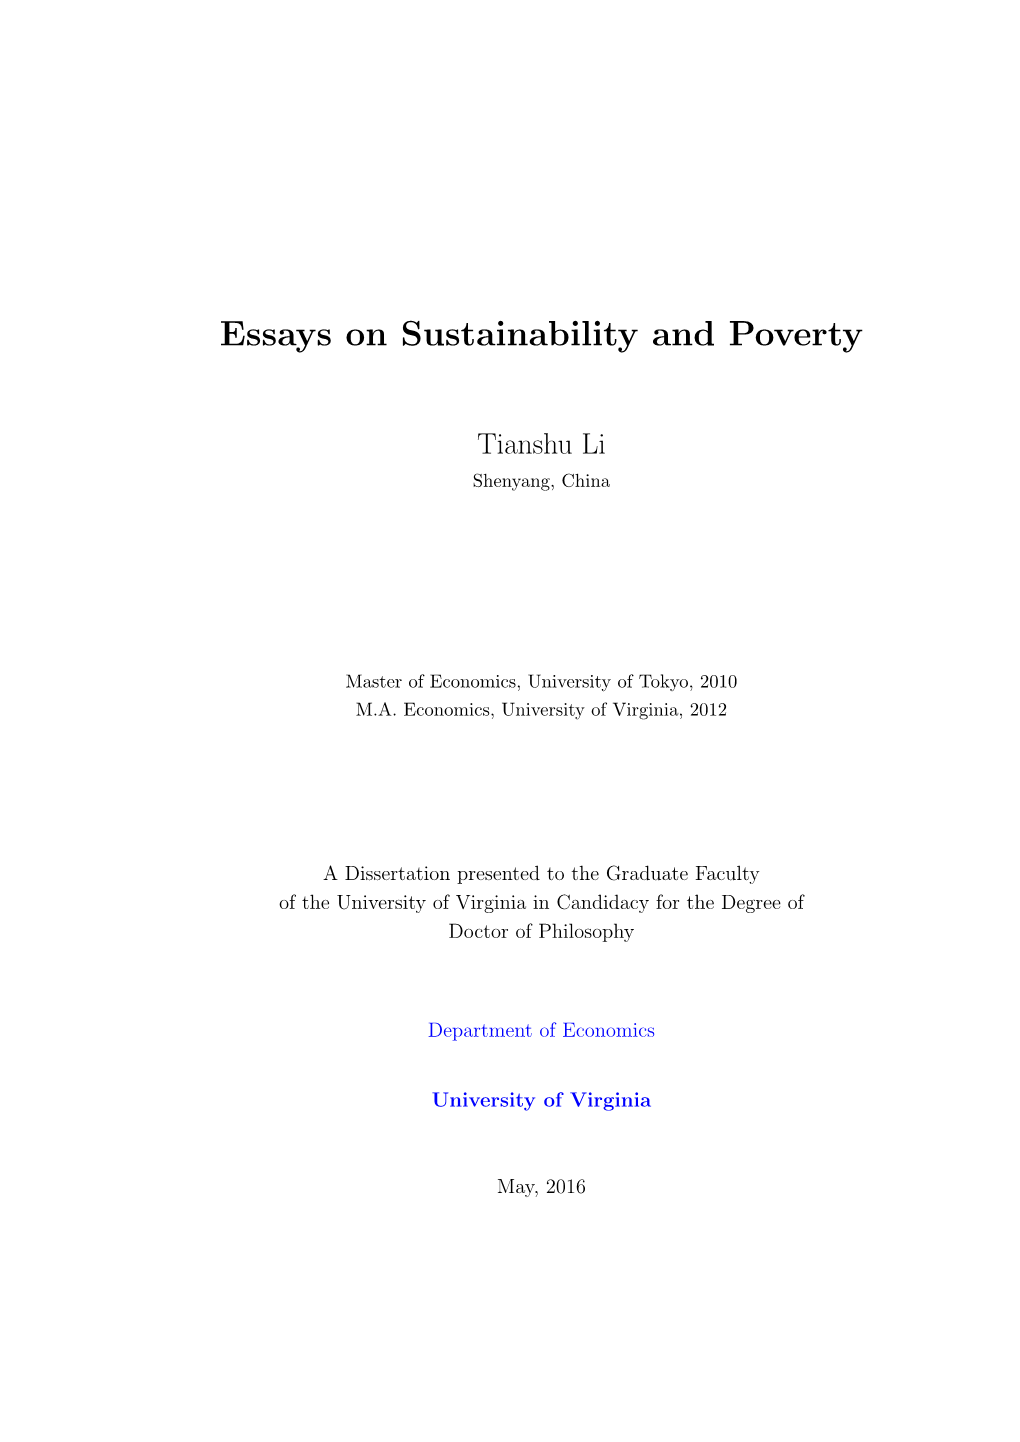 Essays on Sustainability and Poverty